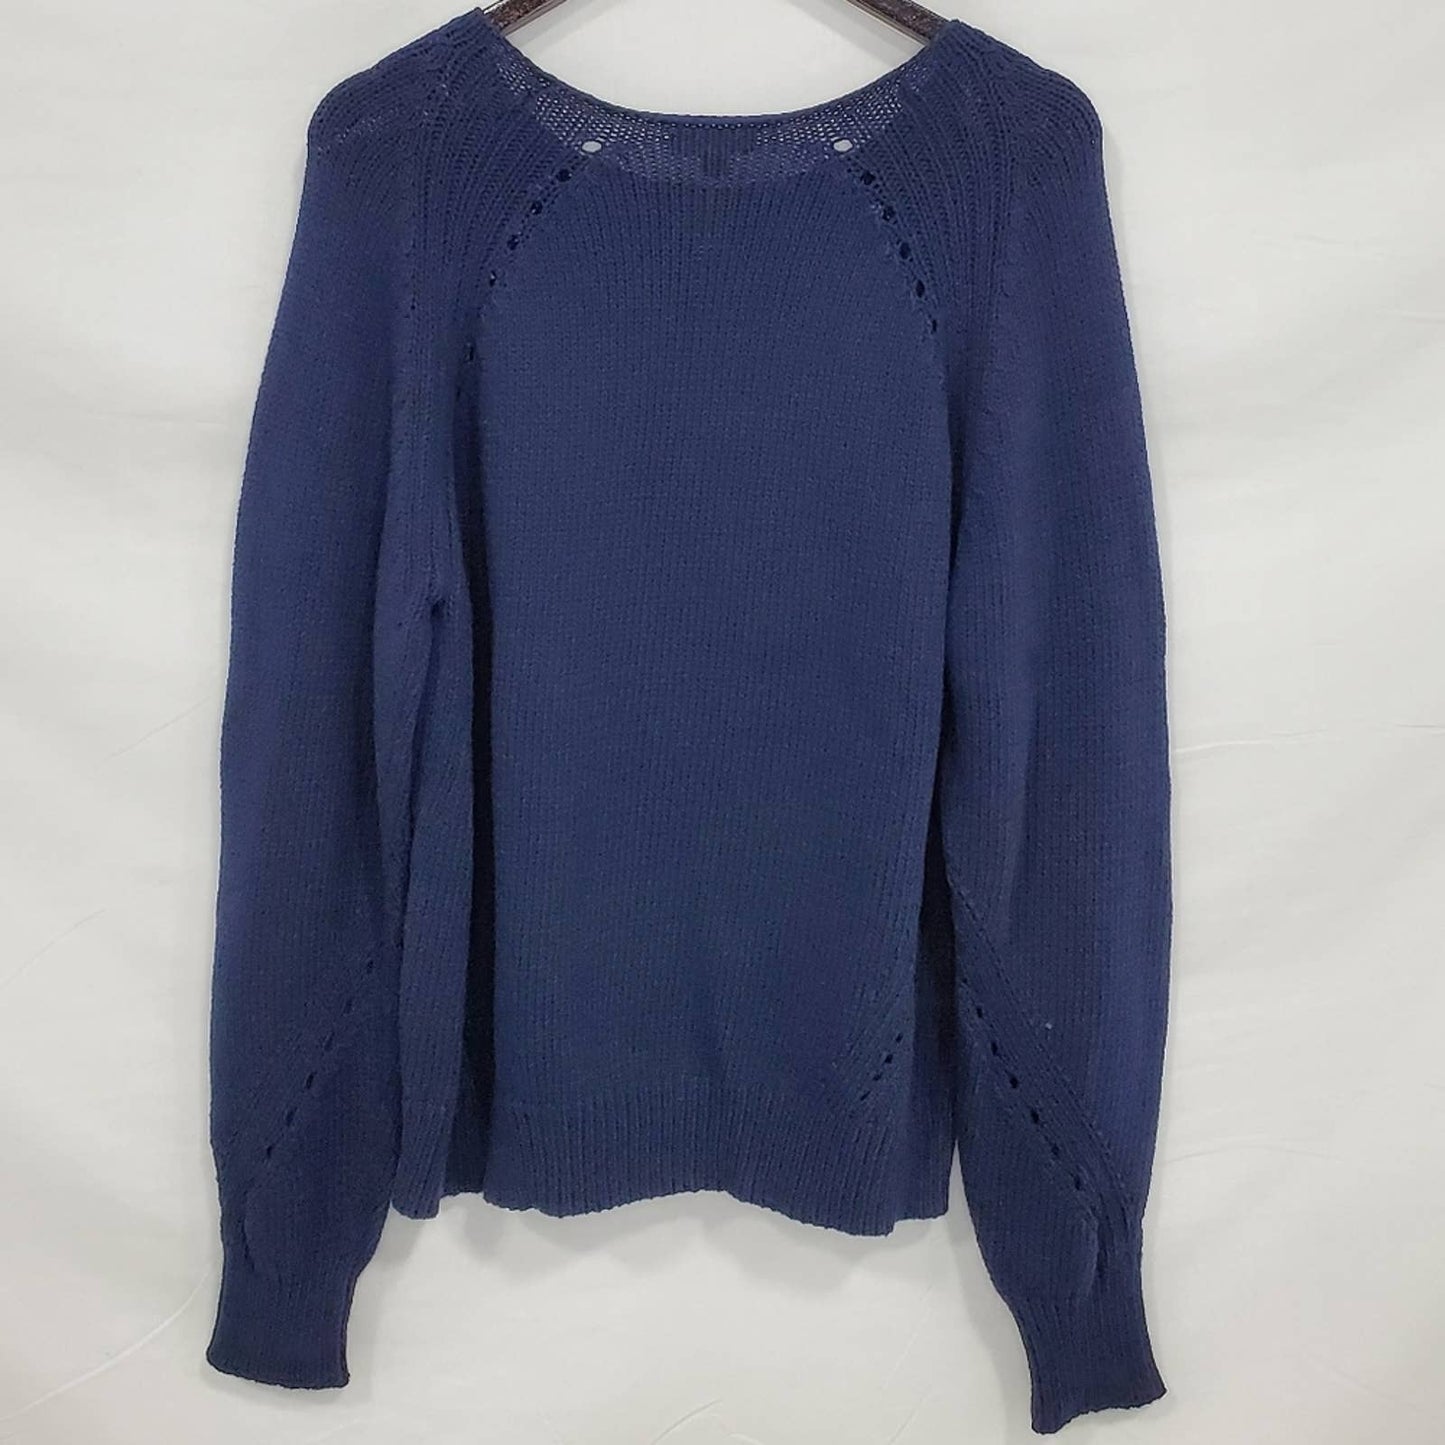 J. Crew Scoop Neck Cable Knit Women's Sweater